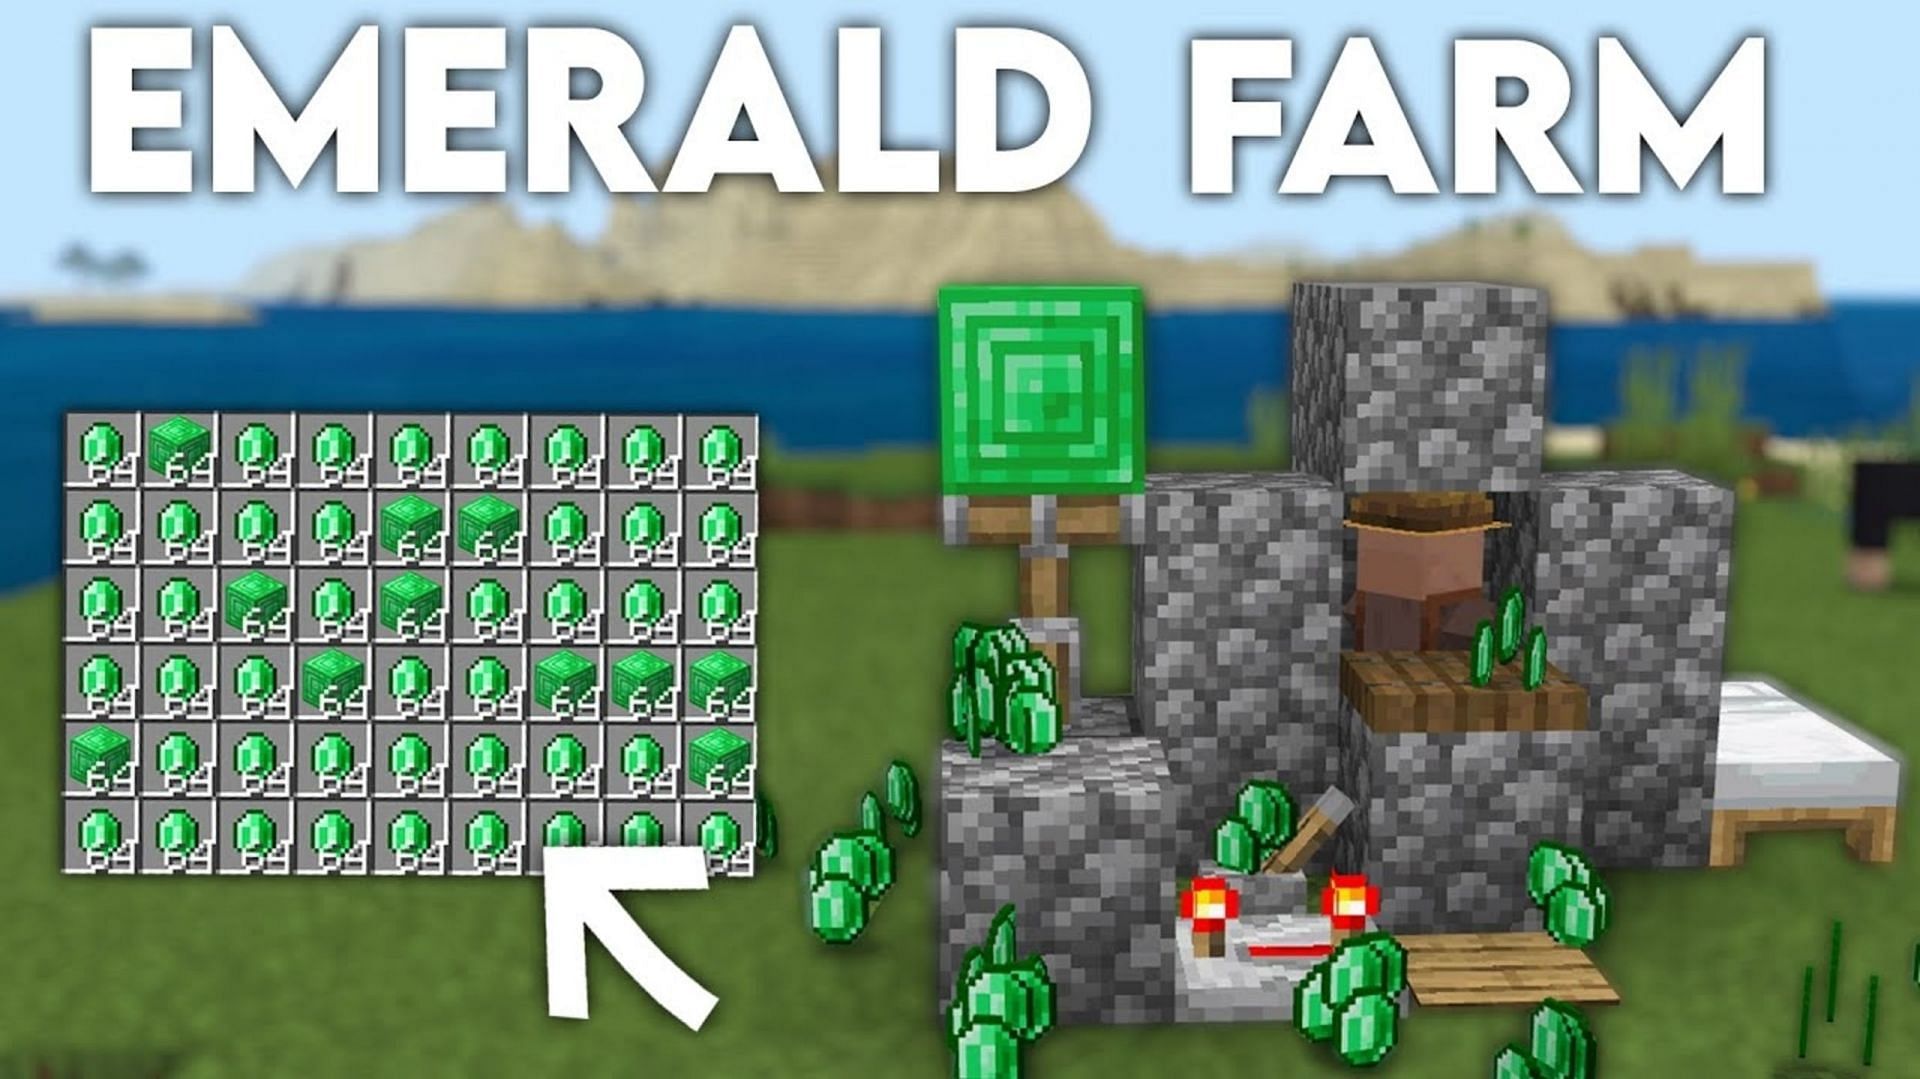 There are various methods to farm emeralds in Minecraft (Image via OinkOink/YouTube)